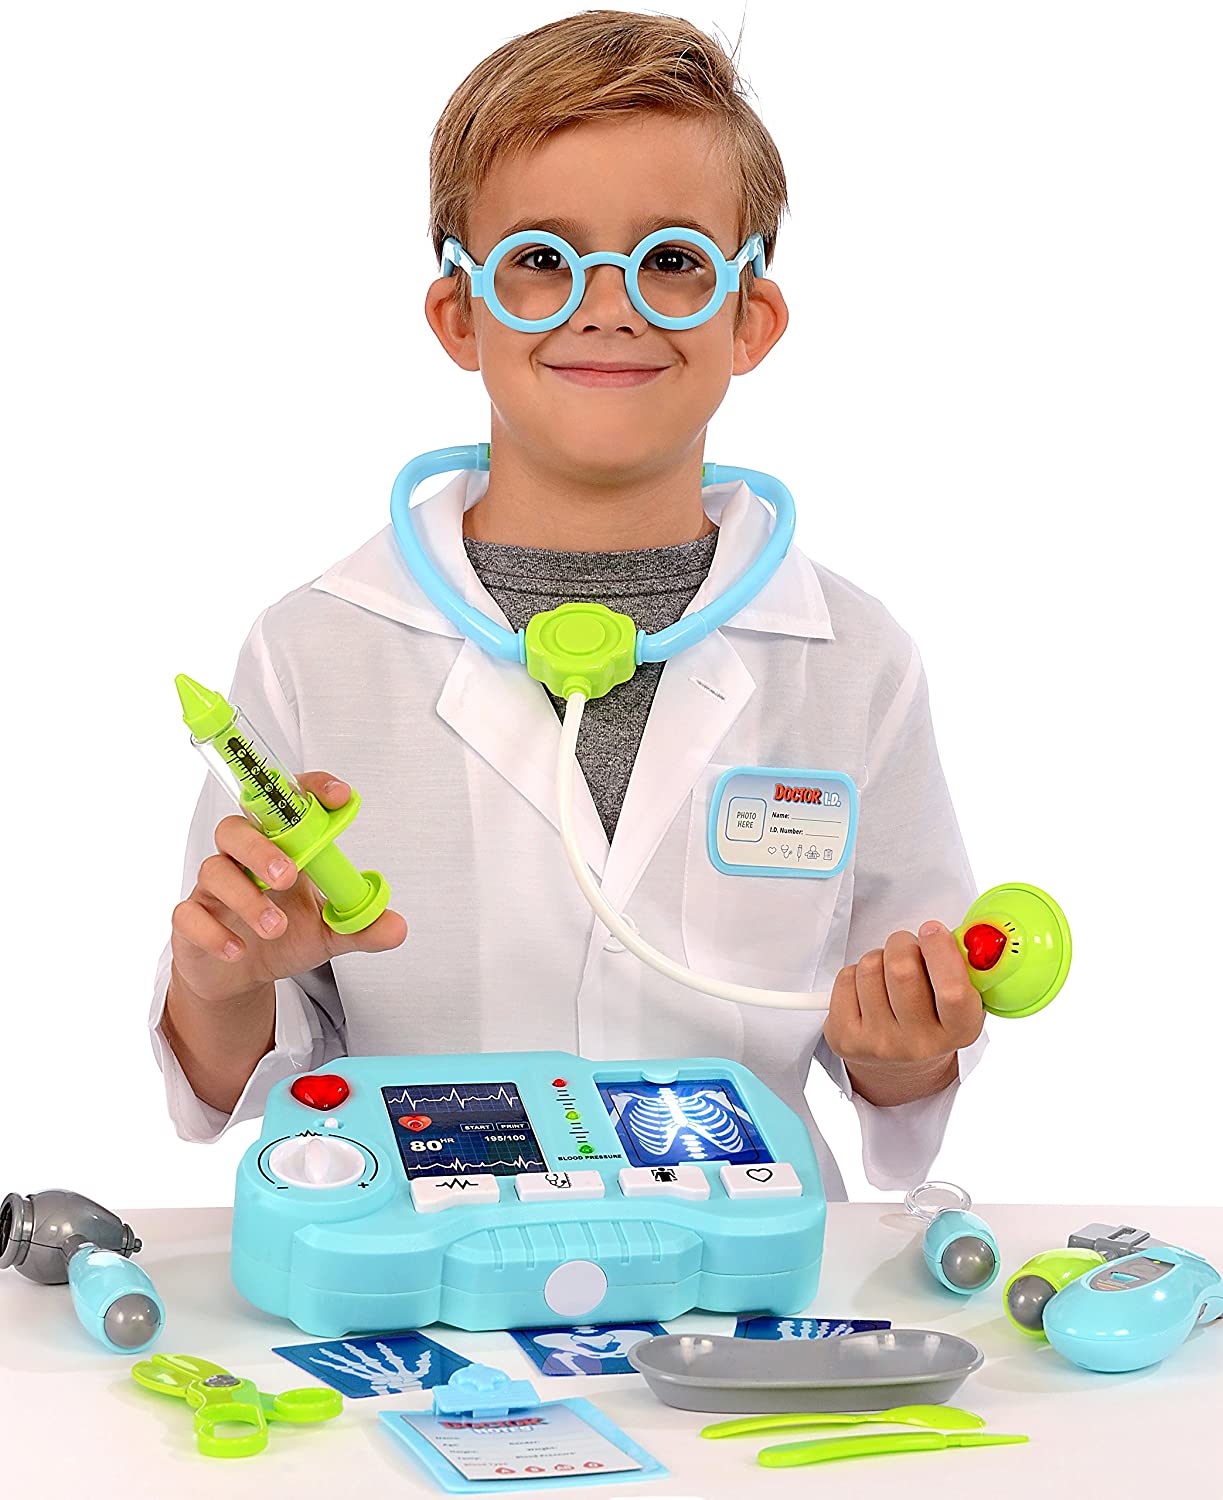 Top 9 Best Toy Doctor Kits Reviews in 2023 6